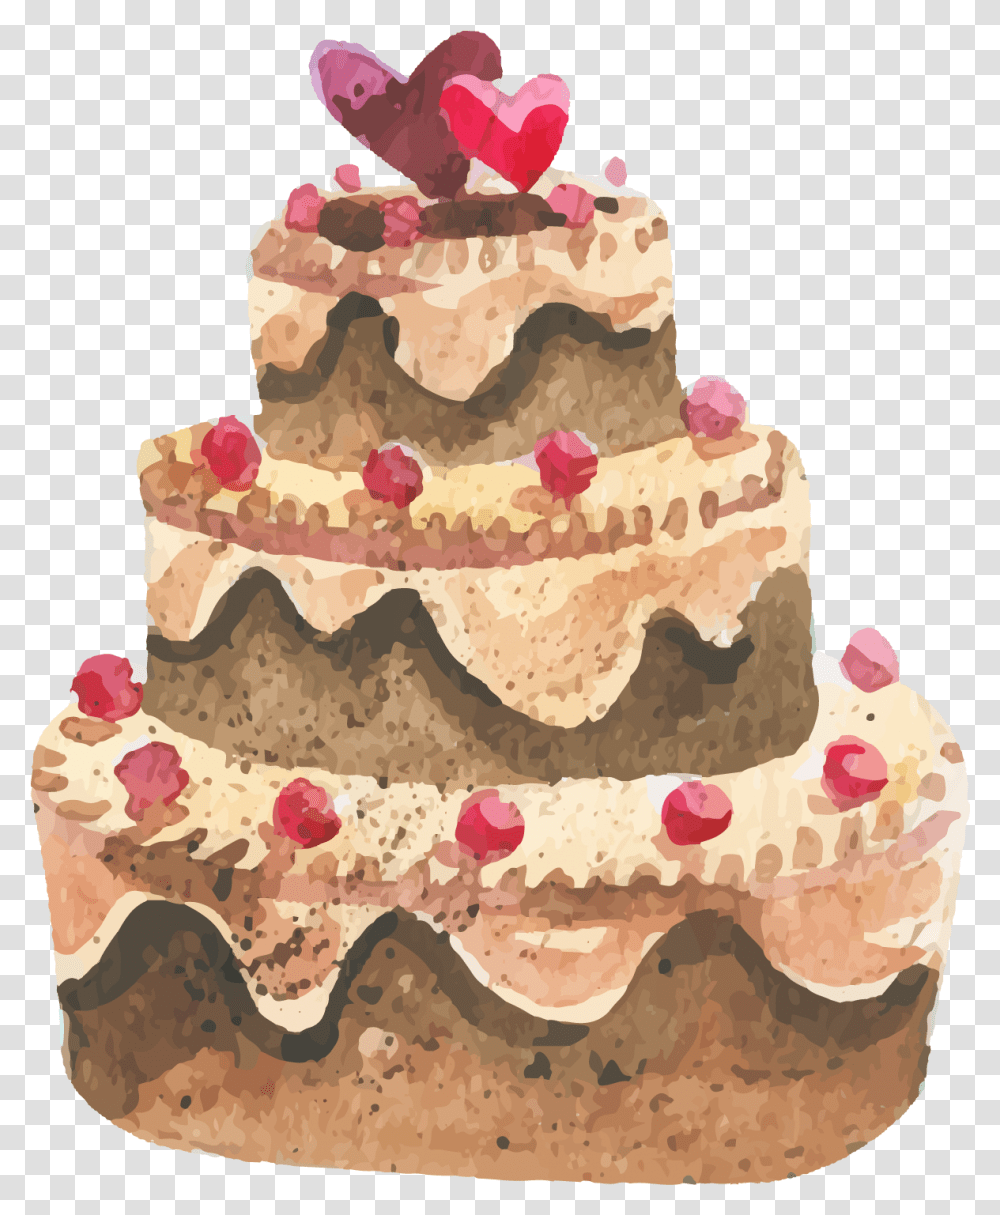 Wedding Cake Clipart Watercolor Wedding Cake Wedding Cake Watercolor, Dessert, Food, Birthday Cake, Clothing Transparent Png